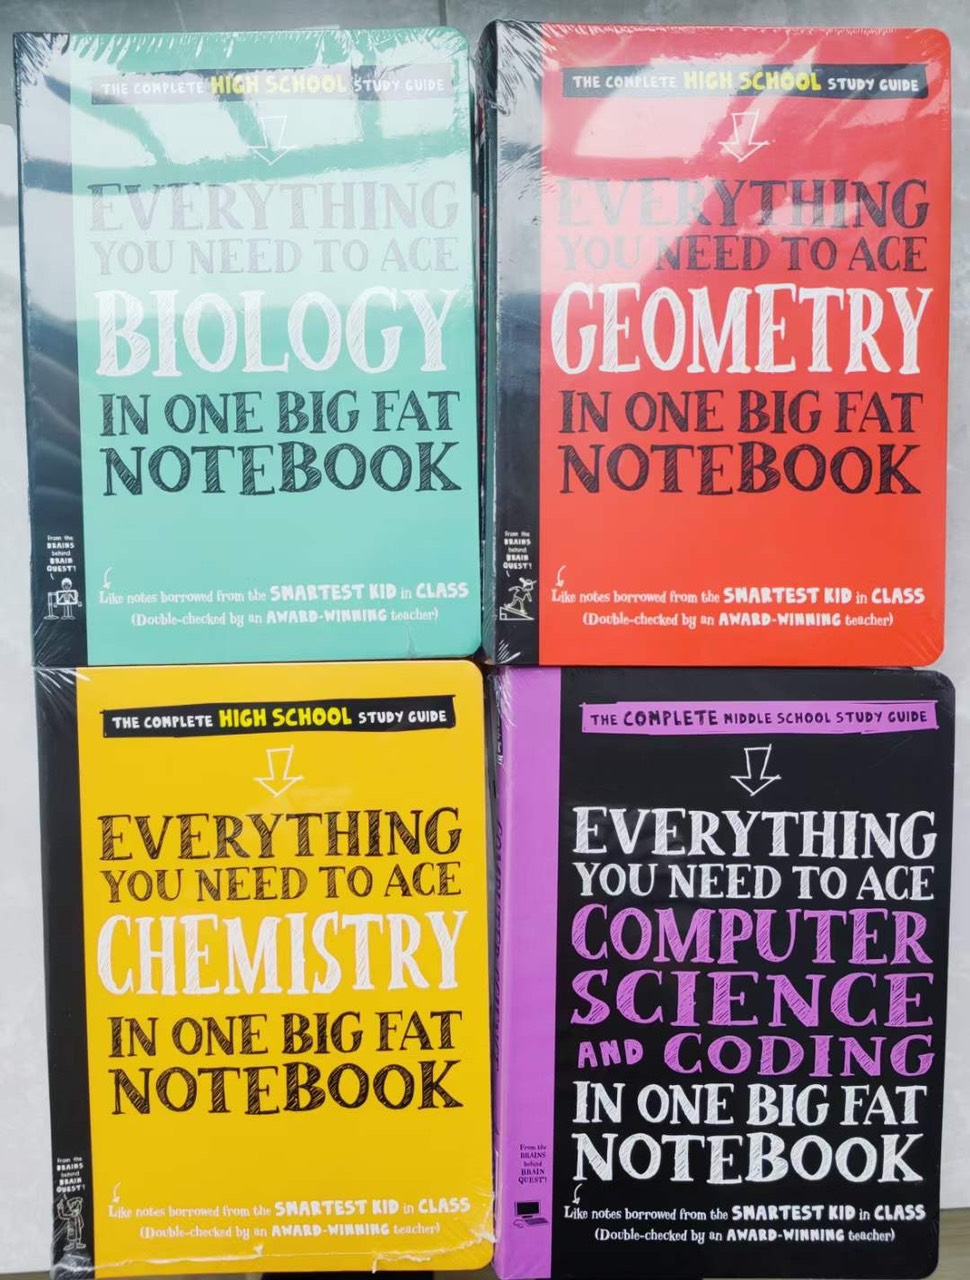 Everything You Need To Ace Math In One Big Fat Notebook (Sách nhập) - 7 quyển mới nhất